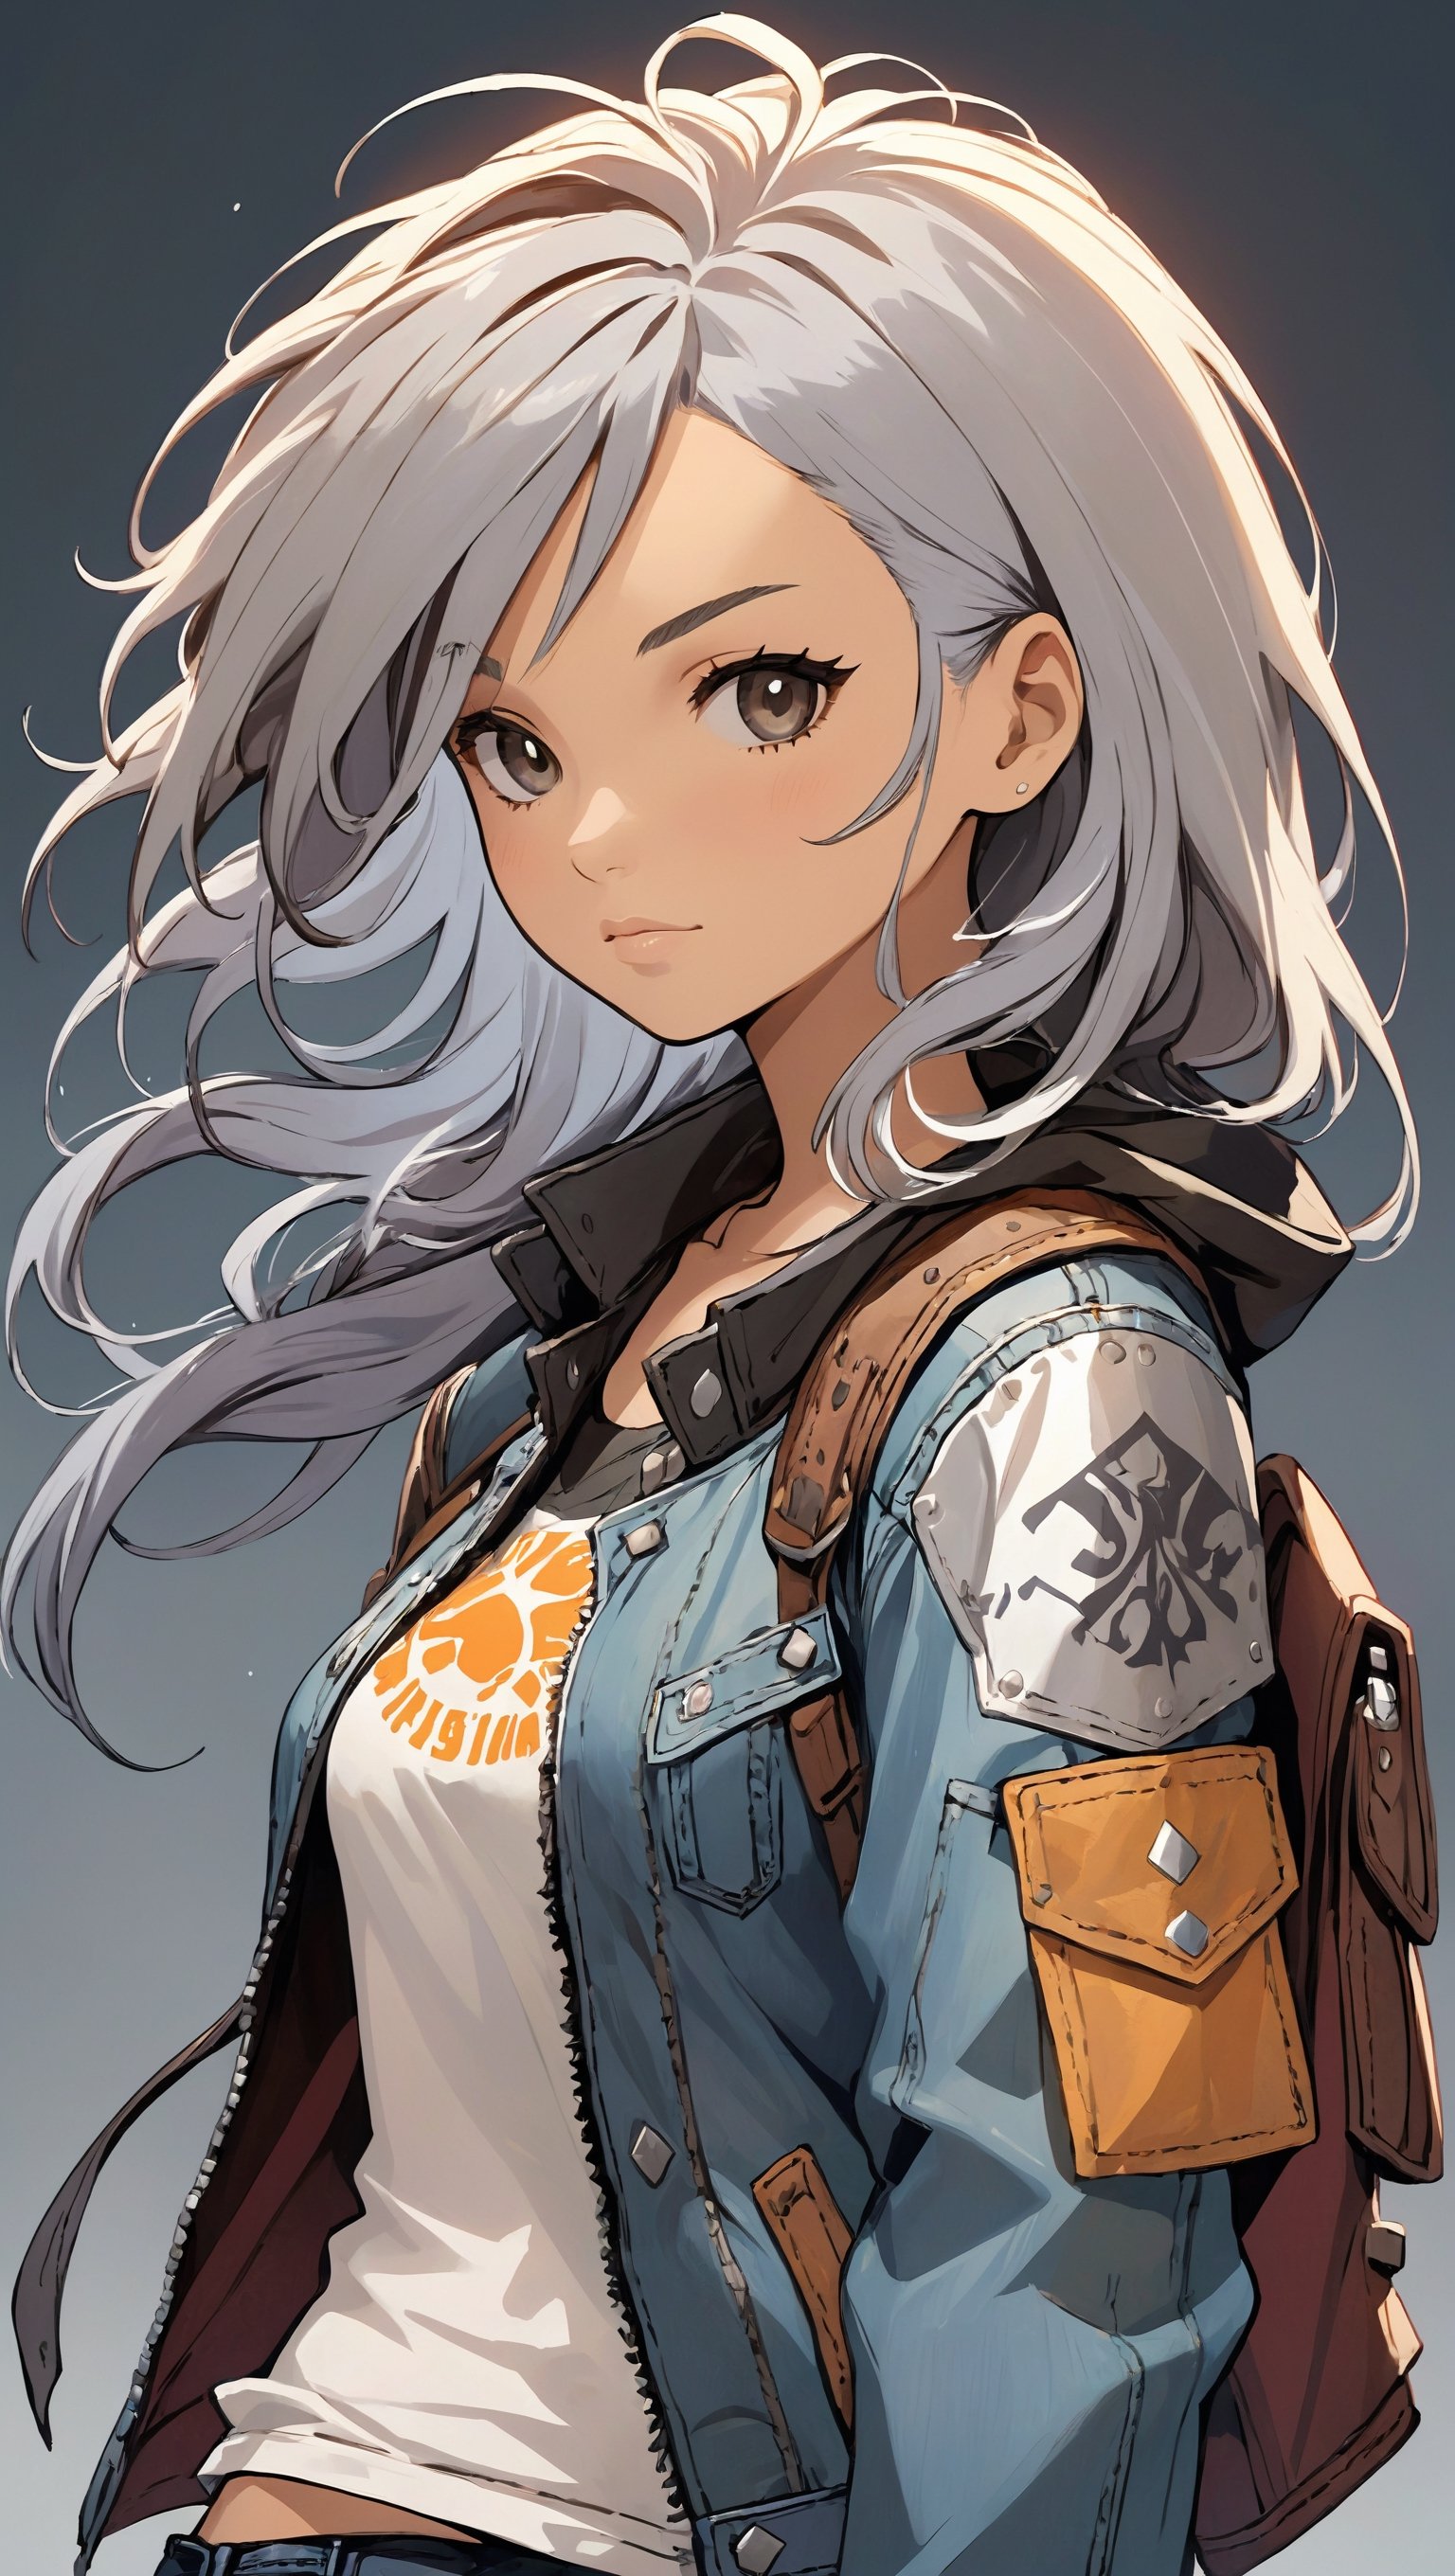 highly detailed illustration in anime style, rpg style, beautiful young woman, 20 years old, metallic silver hair, casual shirt, leather jacket, jeans, boots, ultra detailed face, (very detailed hair), rebels shelter background, fusion of final fantasy videogame and dungeon & dragons realm, high contrast, flat colors, cel shaded, by Nekoshowgun,Magical Fantasy style,3d toon style,portraitart